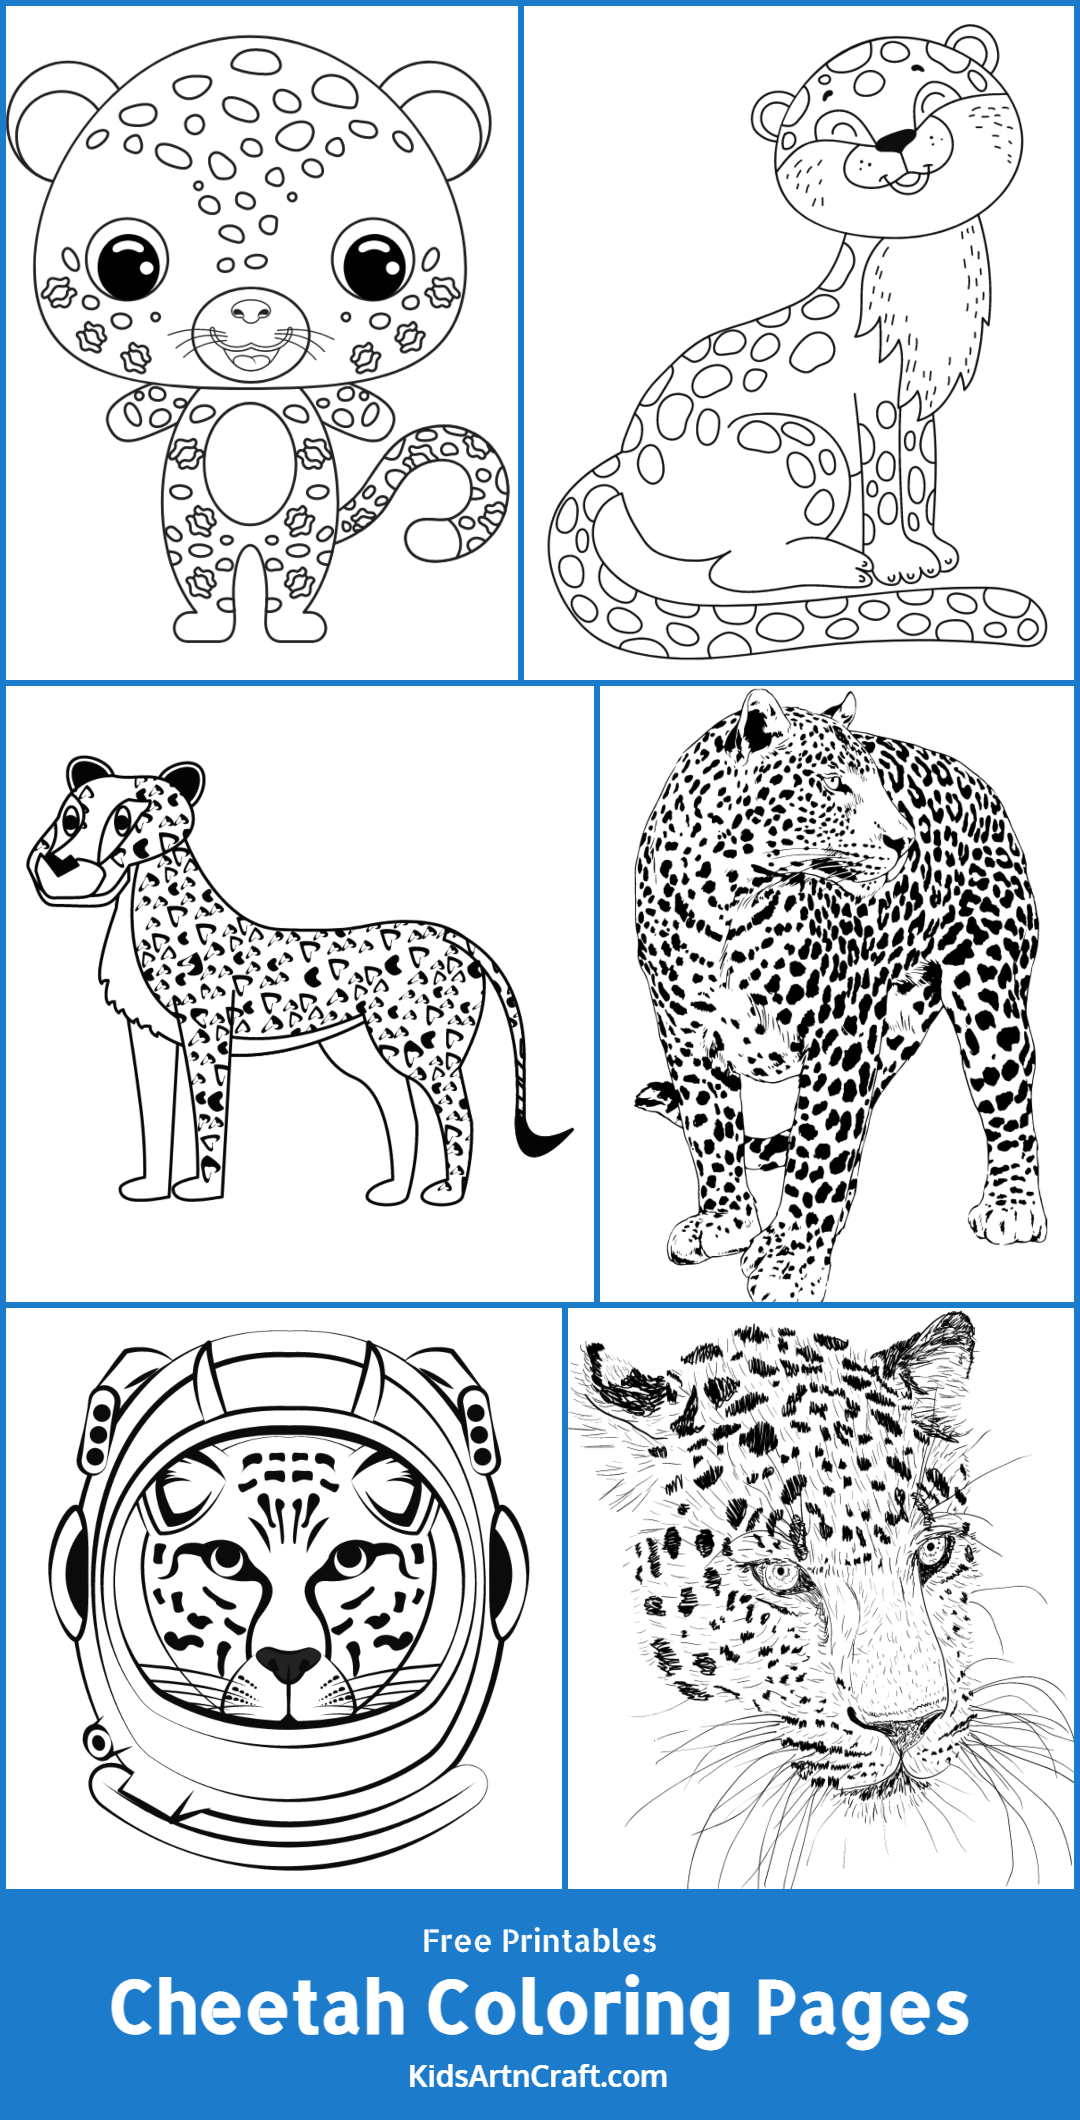 cheetah-coloring-pages-for-kids-free-printables